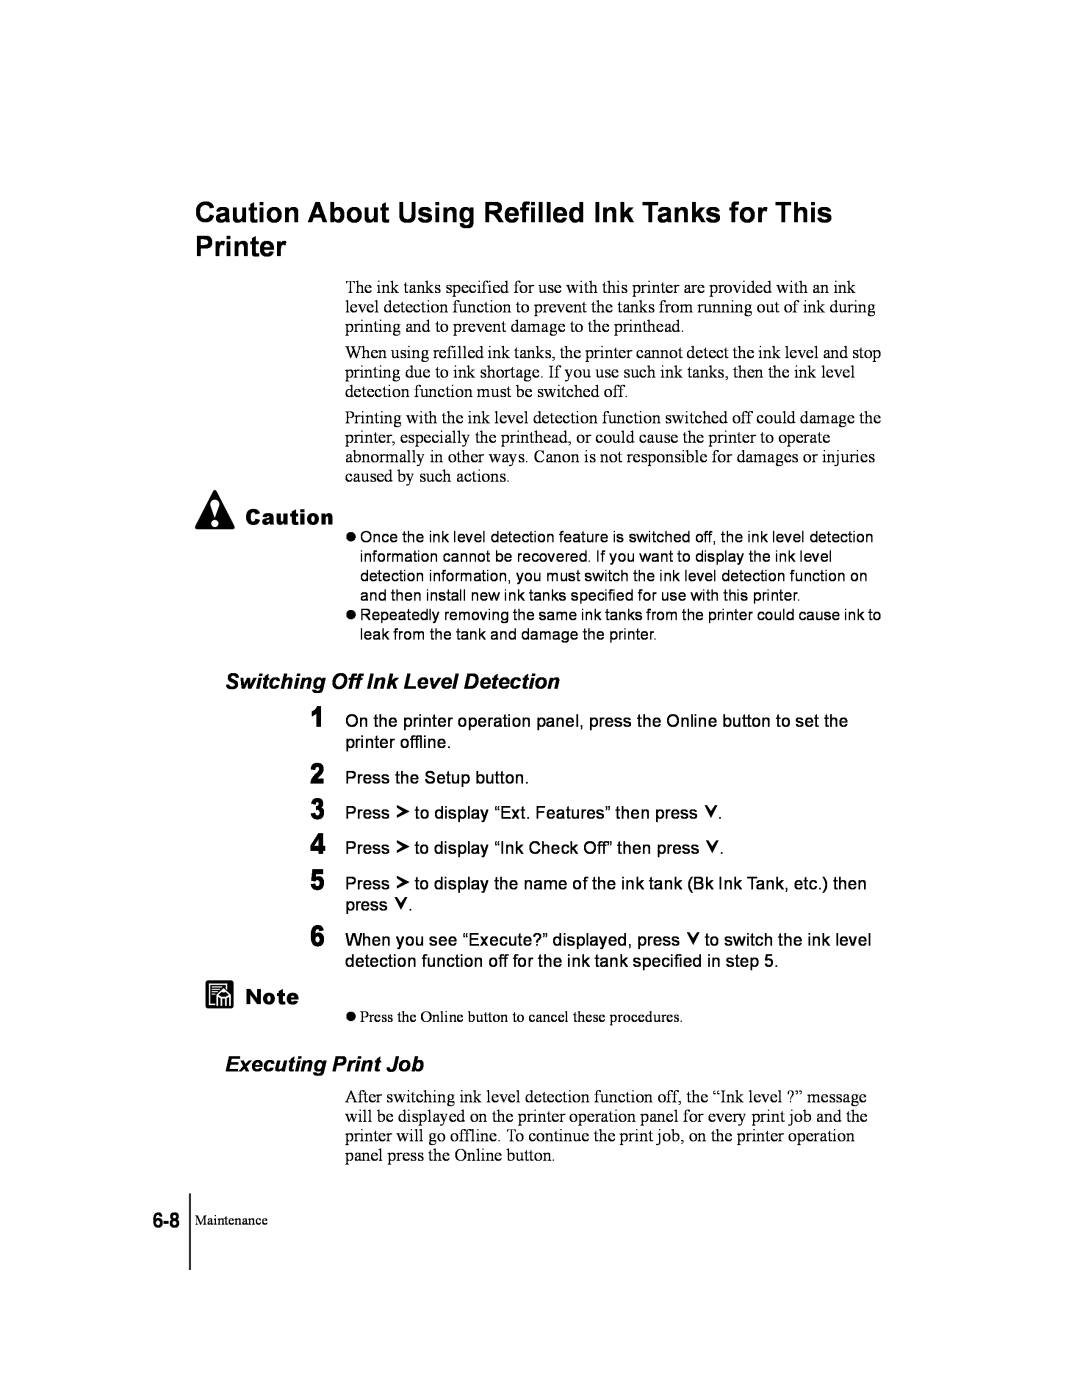 Canon W2200 manual Caution About Using Refilled Ink Tanks for This Printer, Switching Off Ink Level Detection 